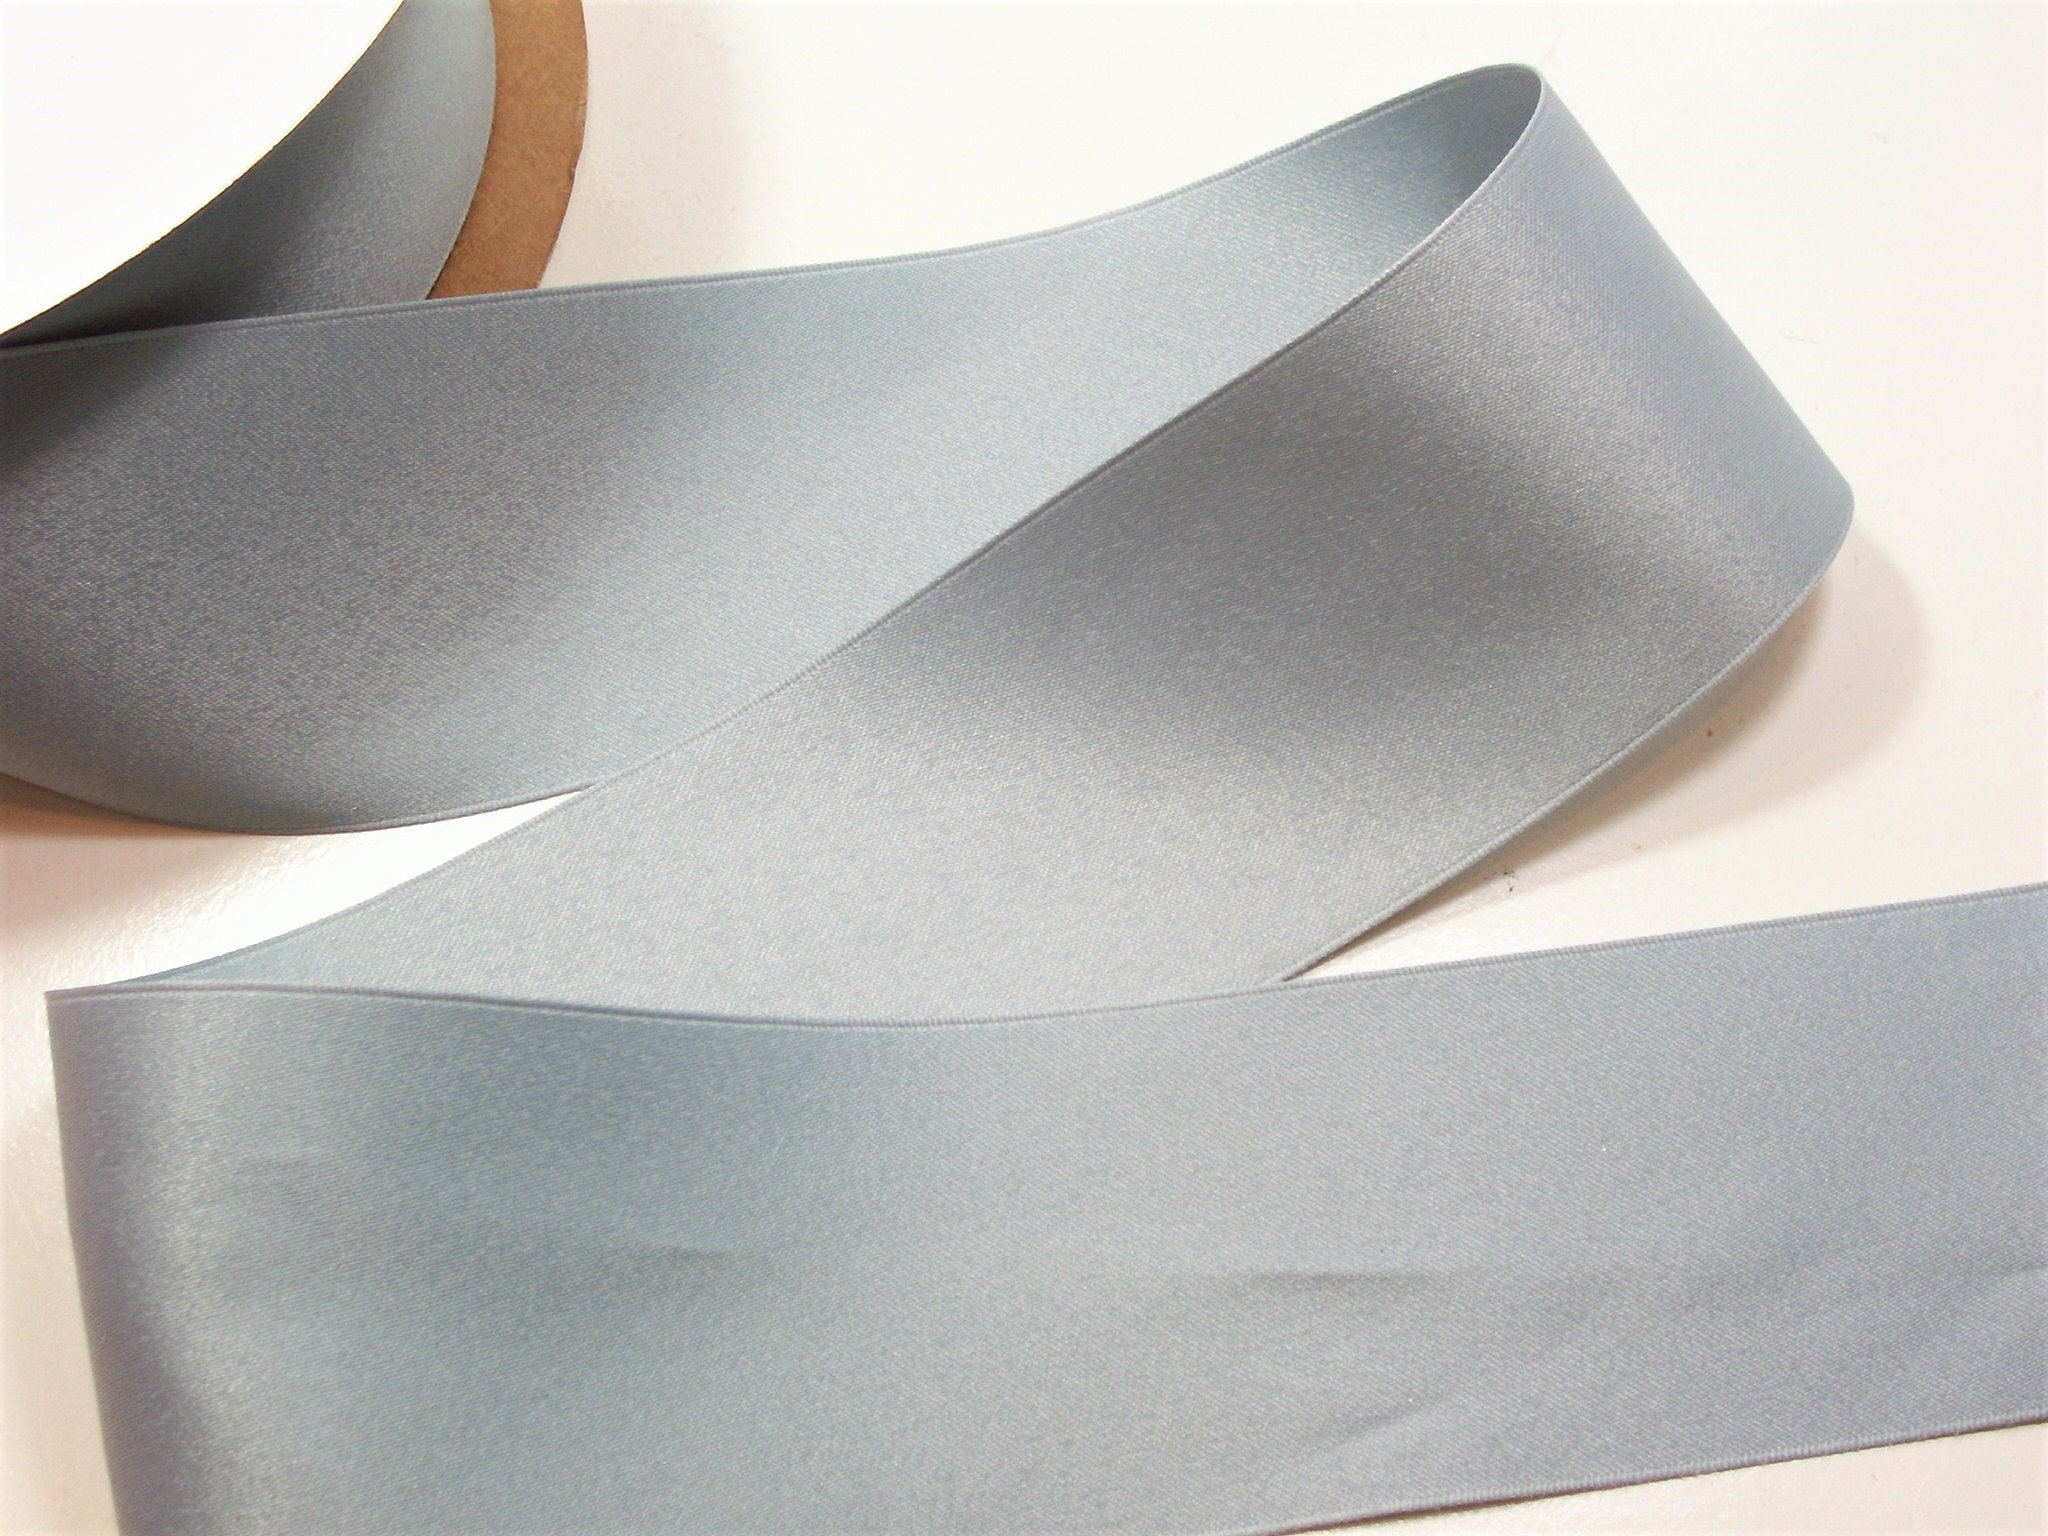 Sage Green Double Satin Ribbon, Premium Quality in 7 Widths, Wedding  Ribbon, Gift Wrap and Stationery RECYCLED RIBBON 